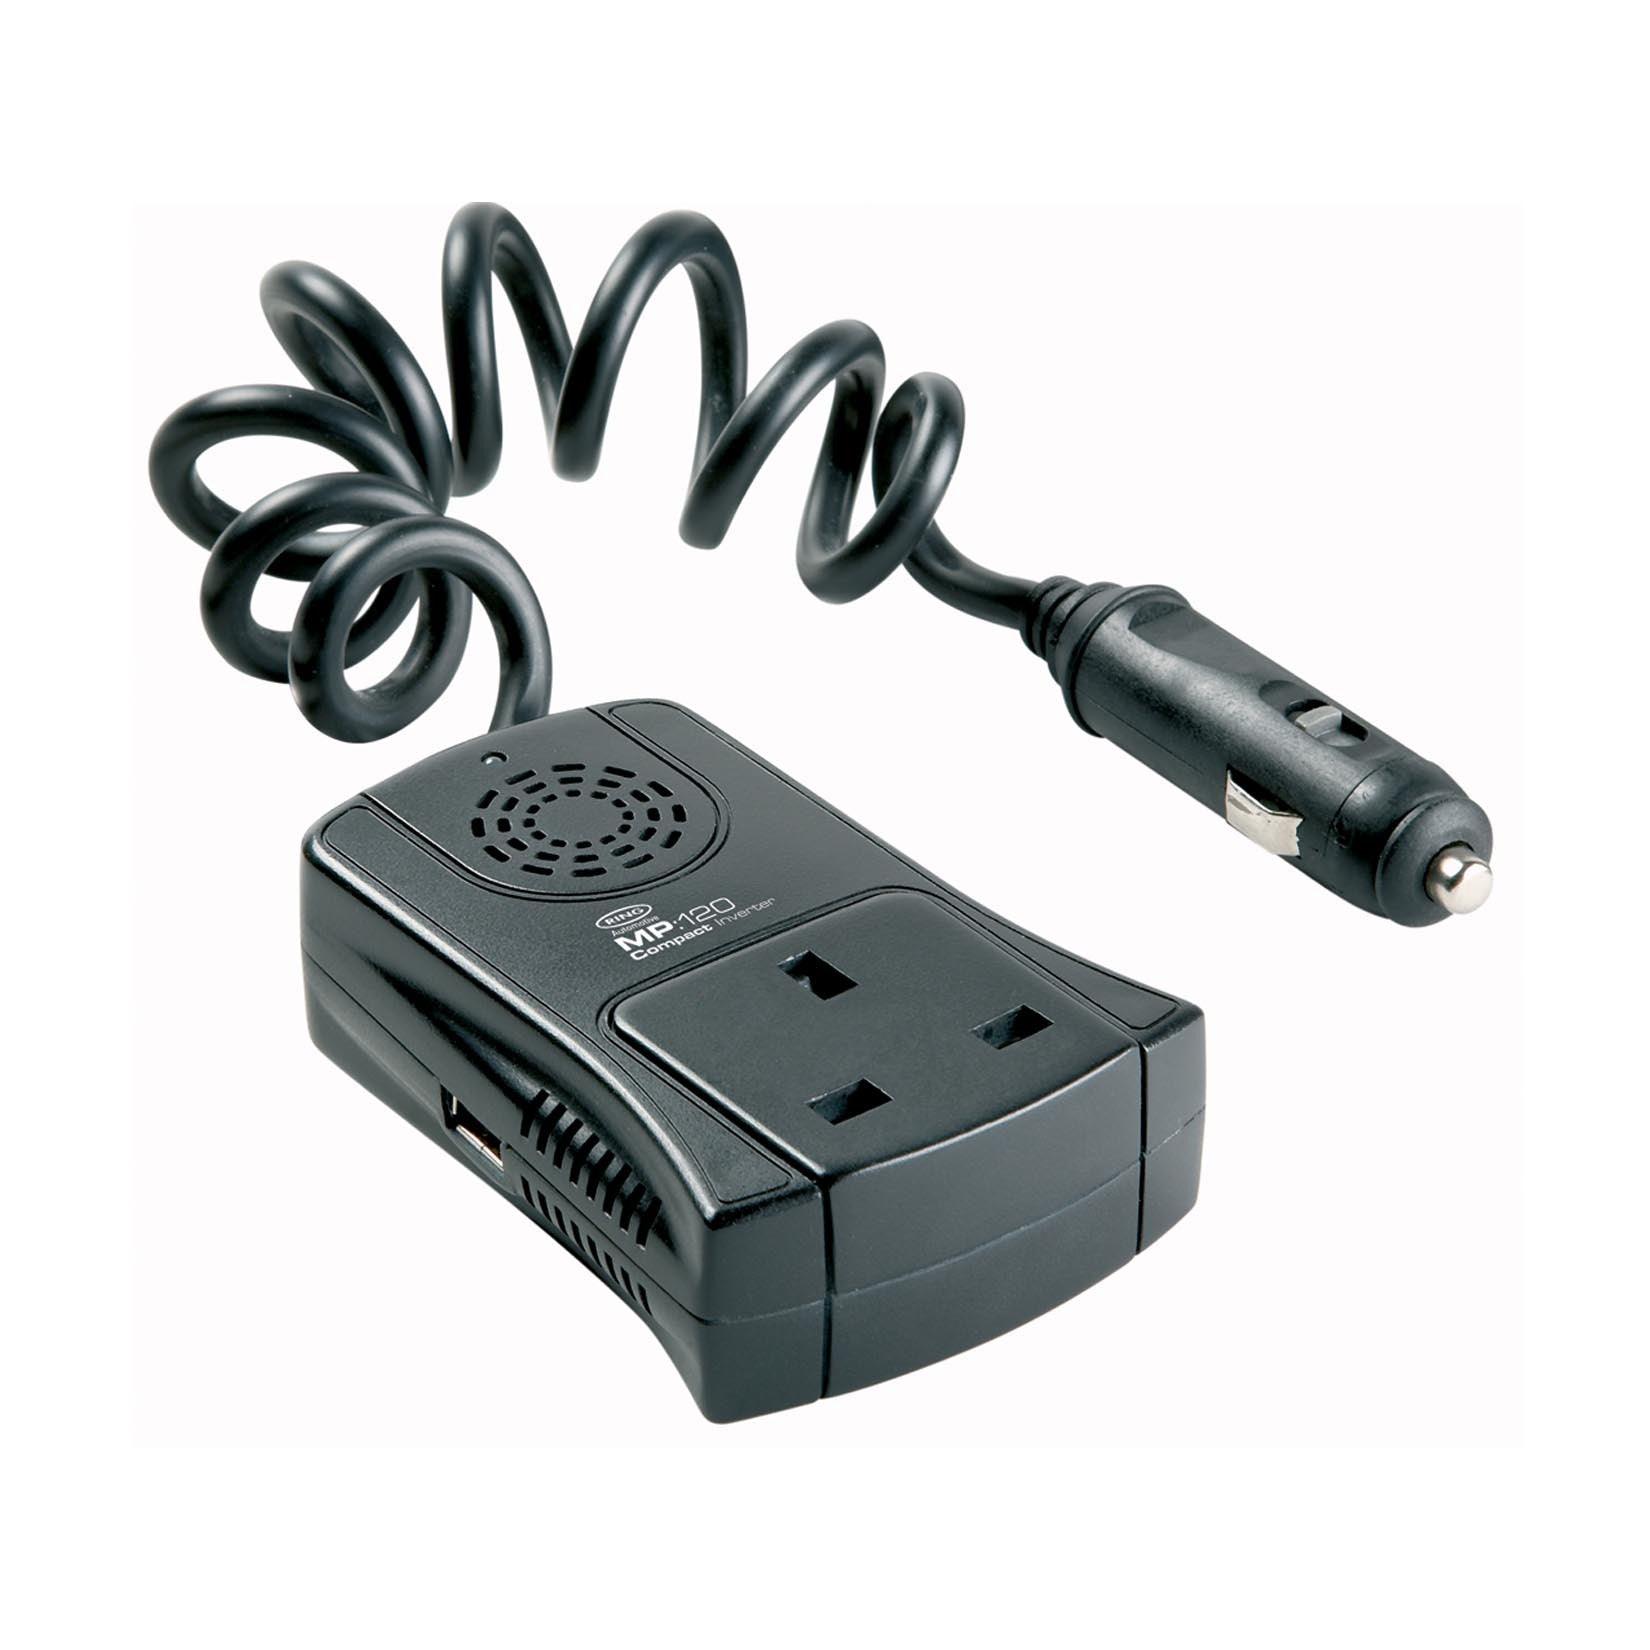 COMPACT INVERTER WITH USB S0CKET AND SINGLE SOCKET - 120W - UNIVERSAL - Storm Xccessories2